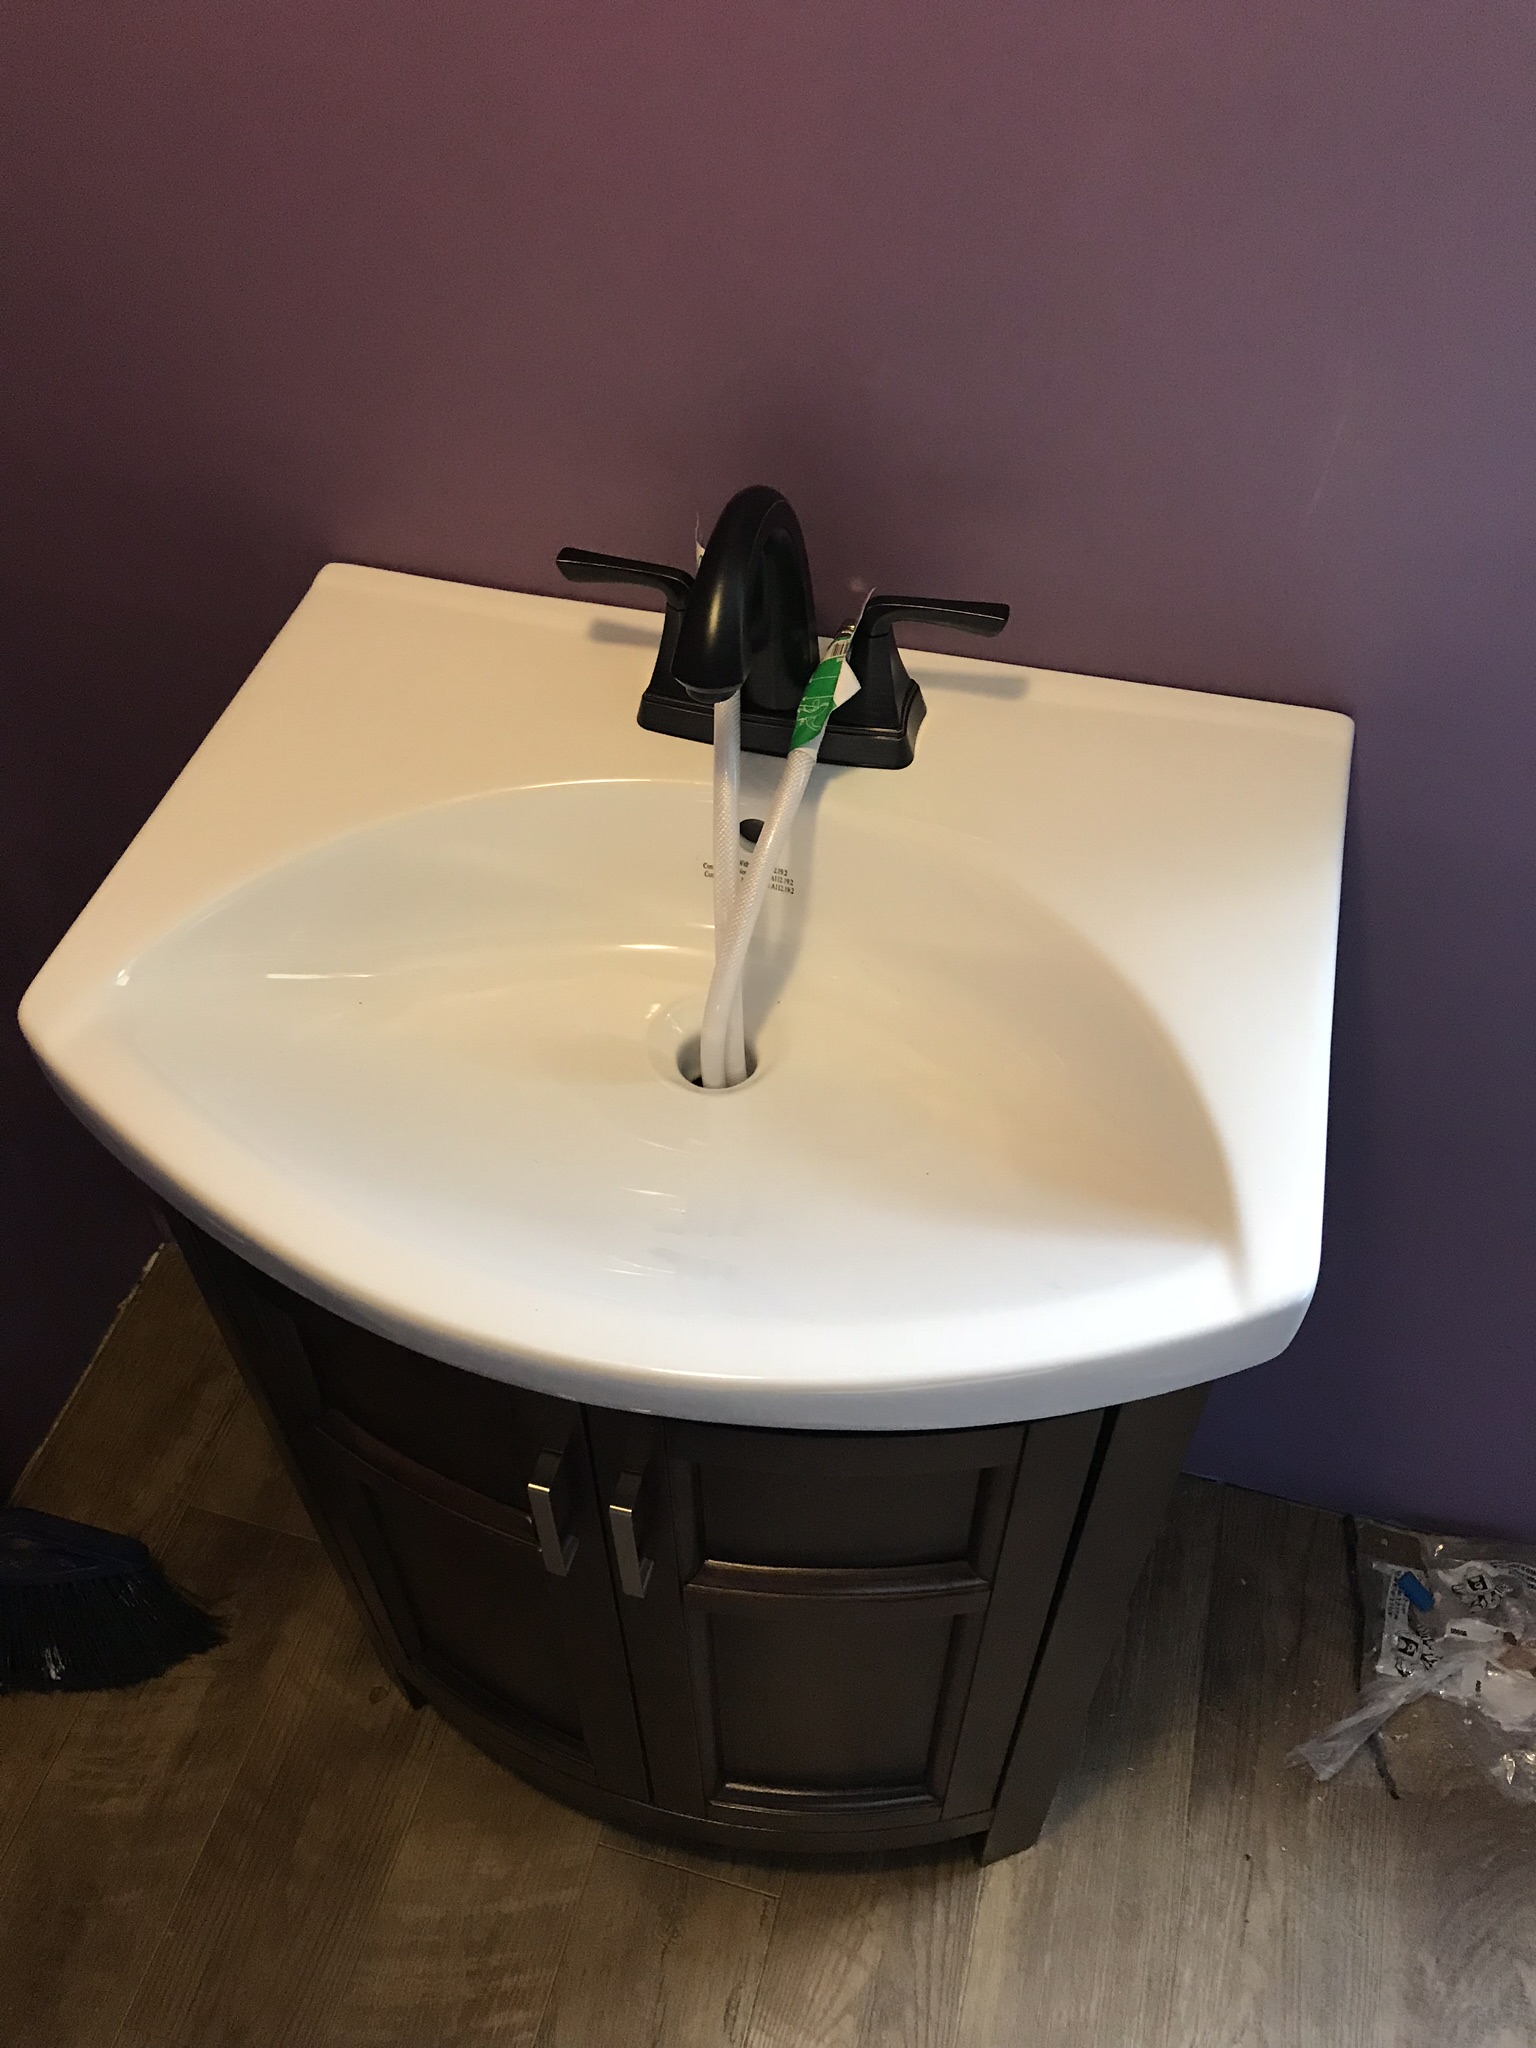 My new sink, almost in